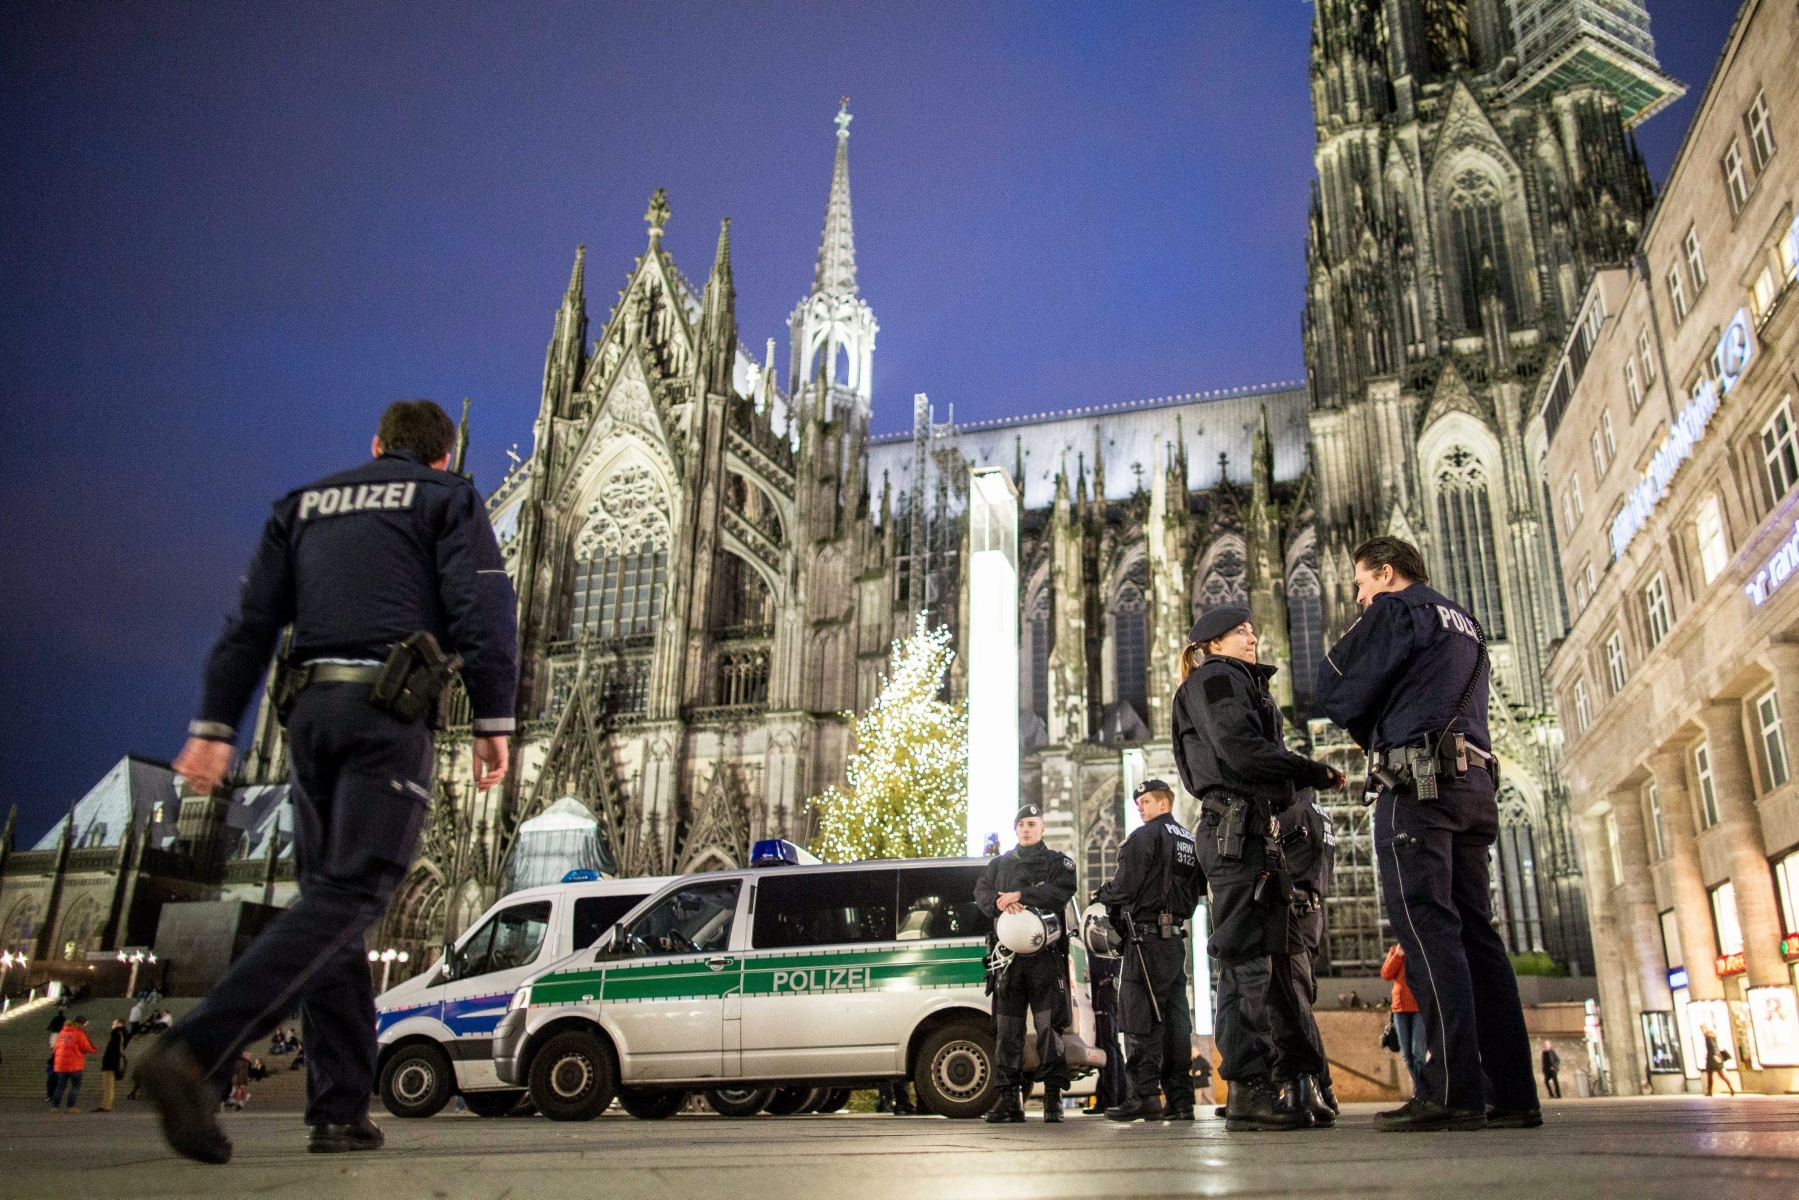 epa05090340 Police officers standing outside the main station next to Cologne cathedral, in Cologne, Germany, 06 January 2016.  After sexual assaults on women at New Year, there is an increased police presence at the main station.  EPA/MAJA HITIJ GERMANY COLOGNE CRIME ATTACKS